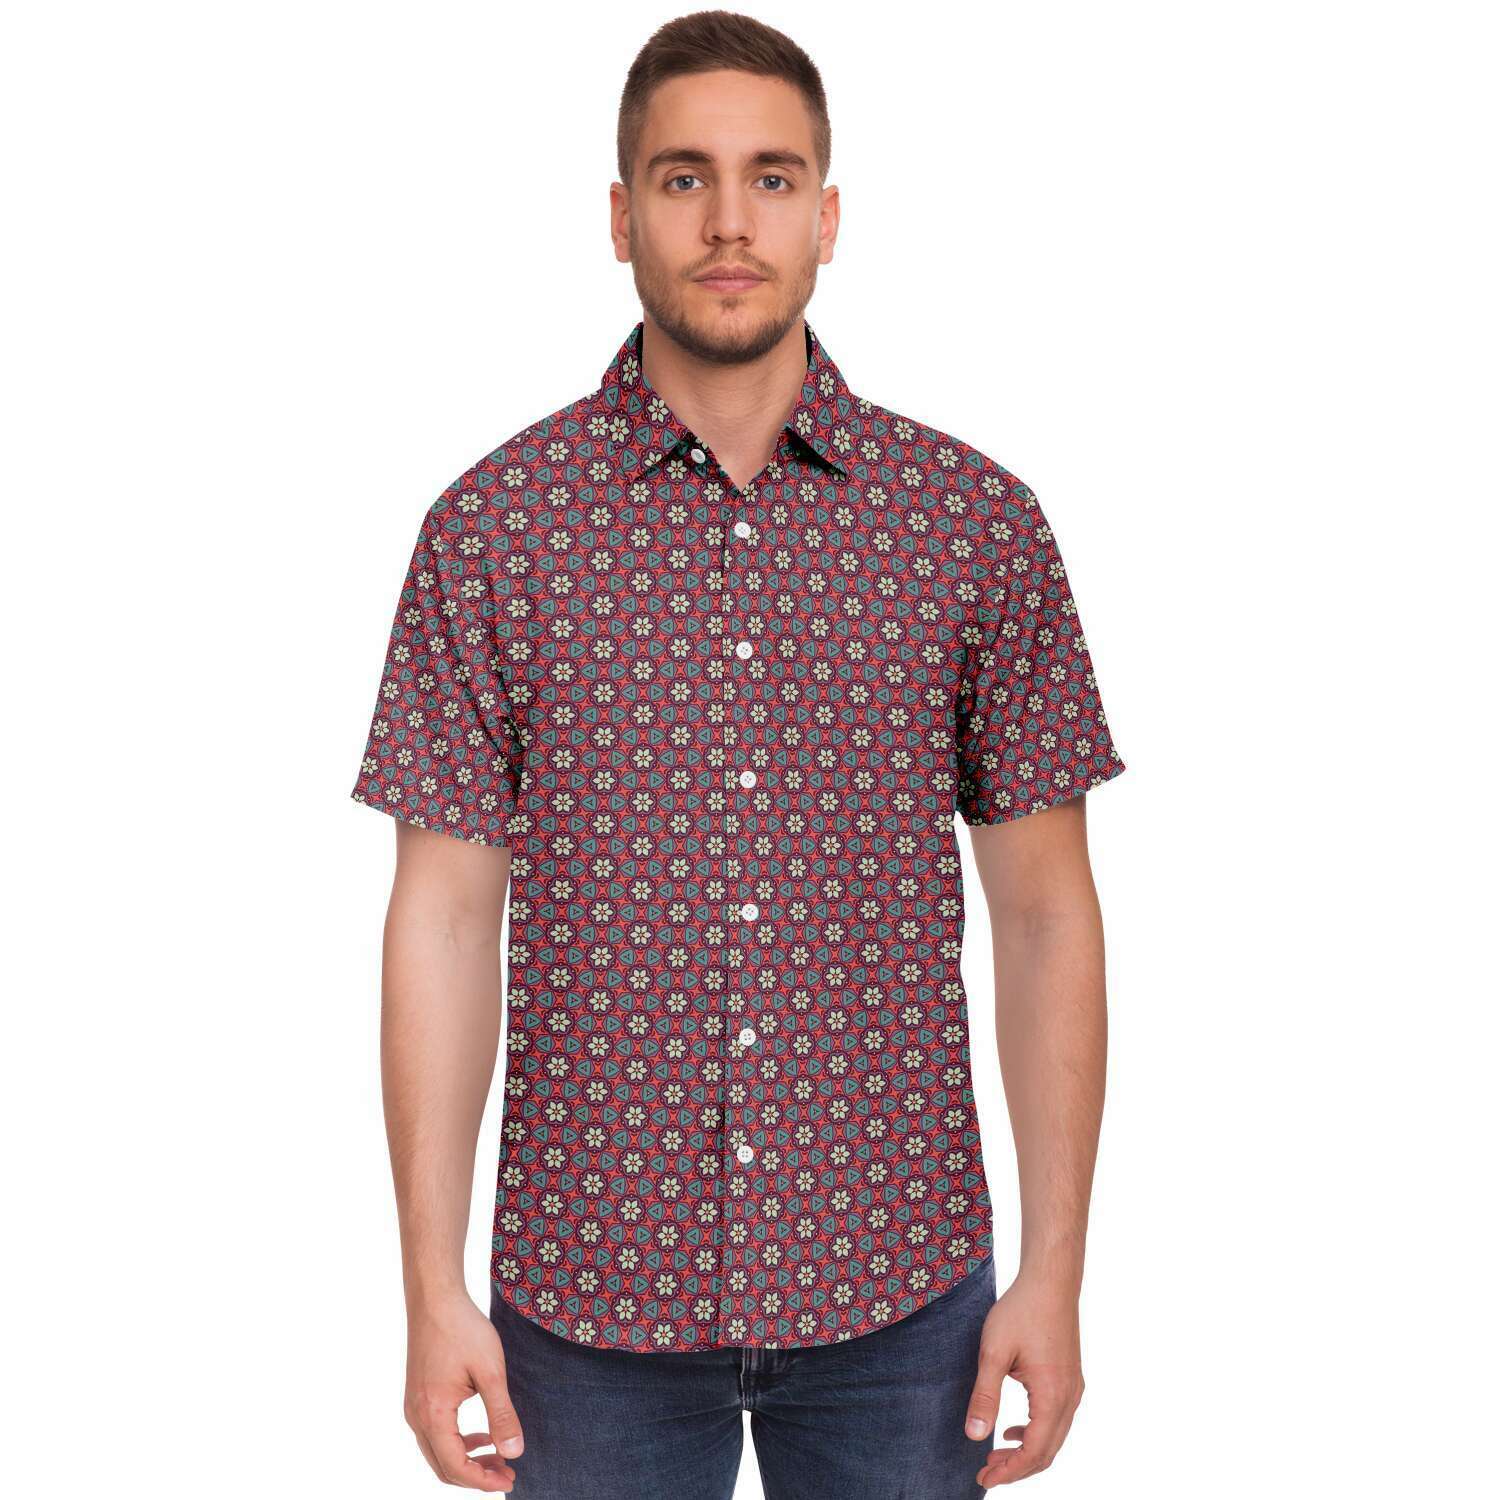 Red Teal Floral Geometric Men's Short Sleeve Button Down Shirt - kayzers